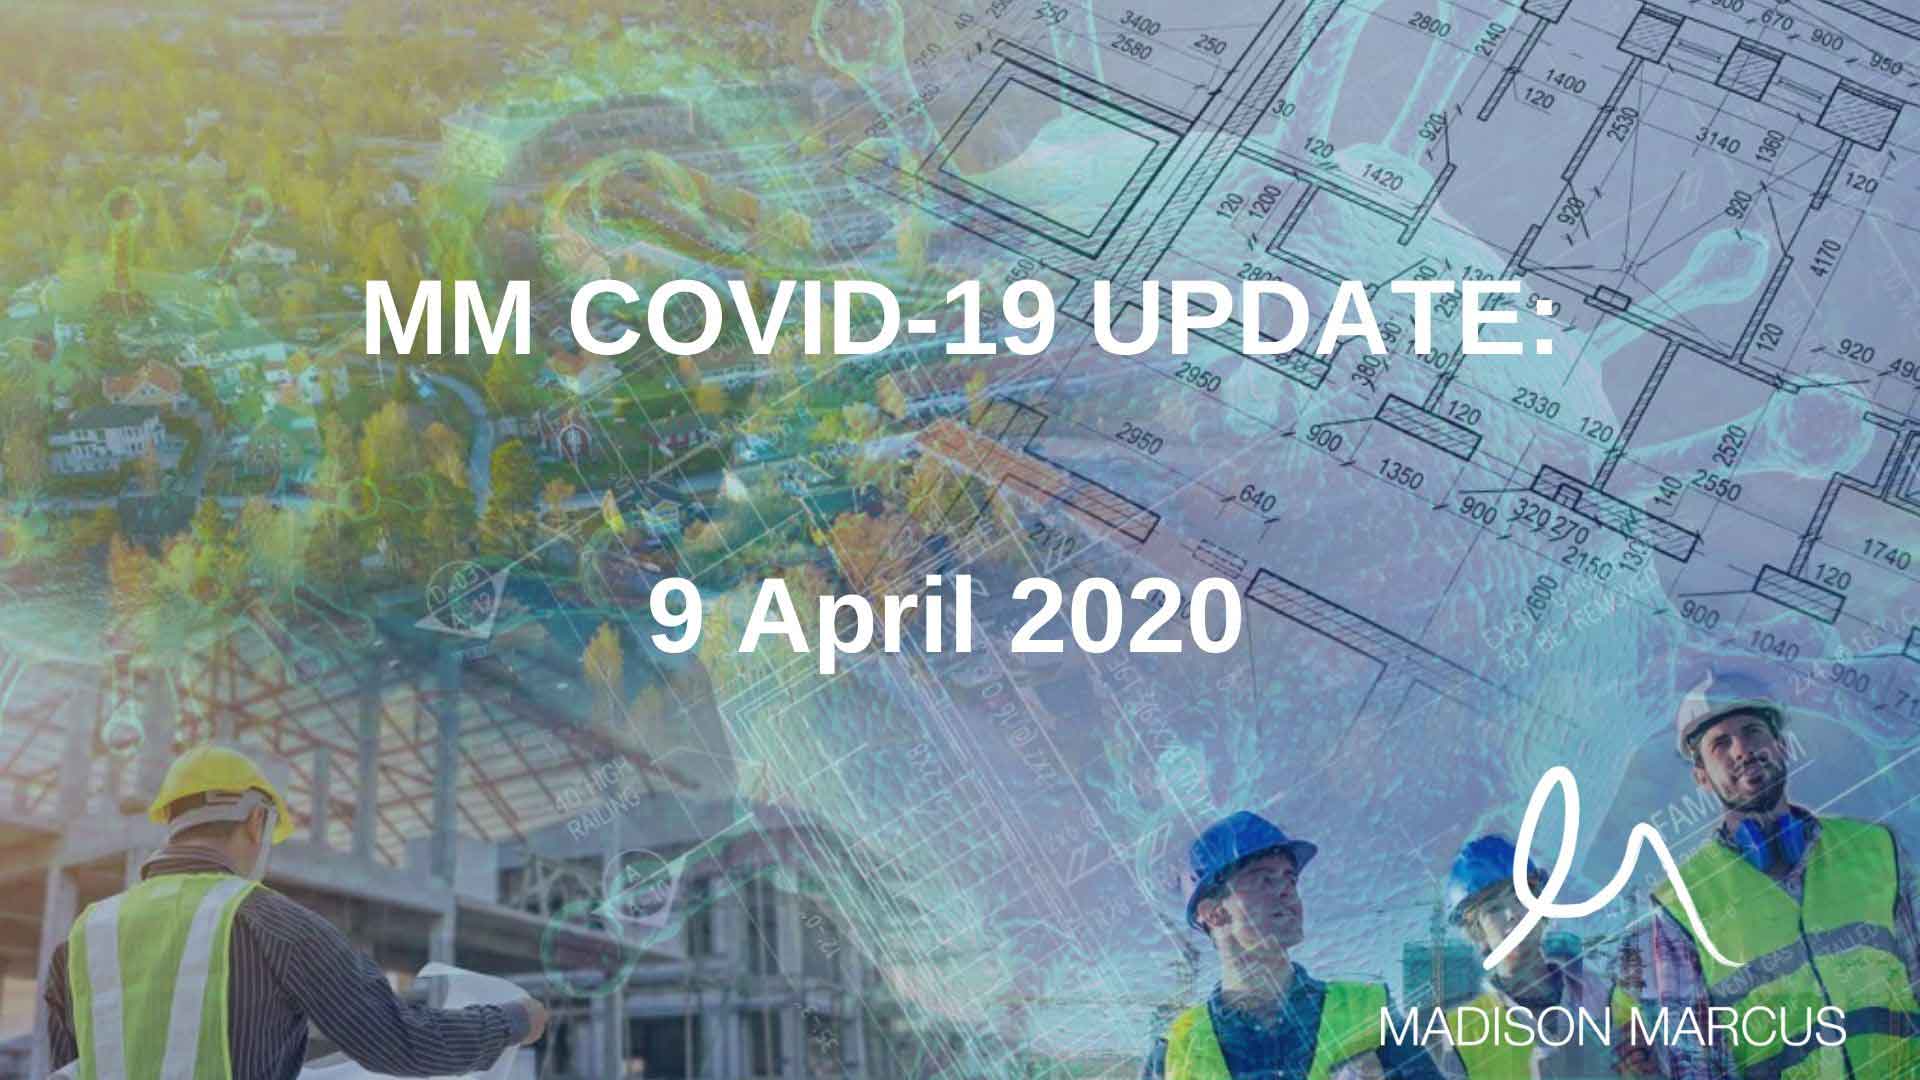 THE COVID-19 IMPACT ON PLANNING AND DEVELOPMENT IN NSW